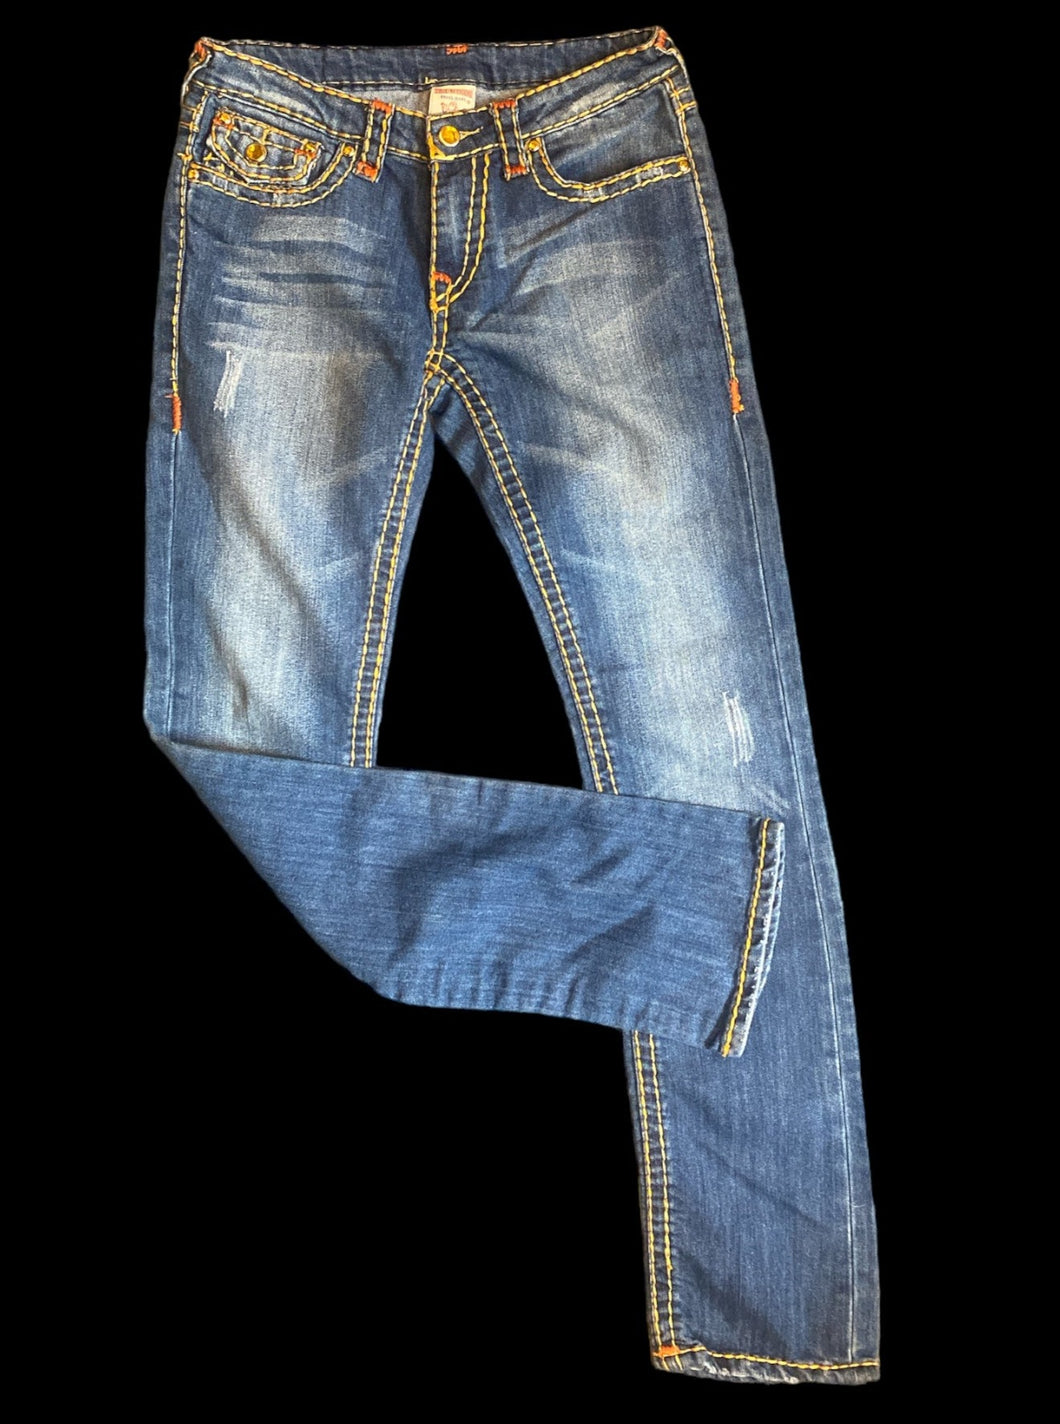 M Blue denim lightly distressed jeans w/ yellow & orange embroidered stitching, jeweled buttons, back flap buttoned pockets, & zipper/button closure